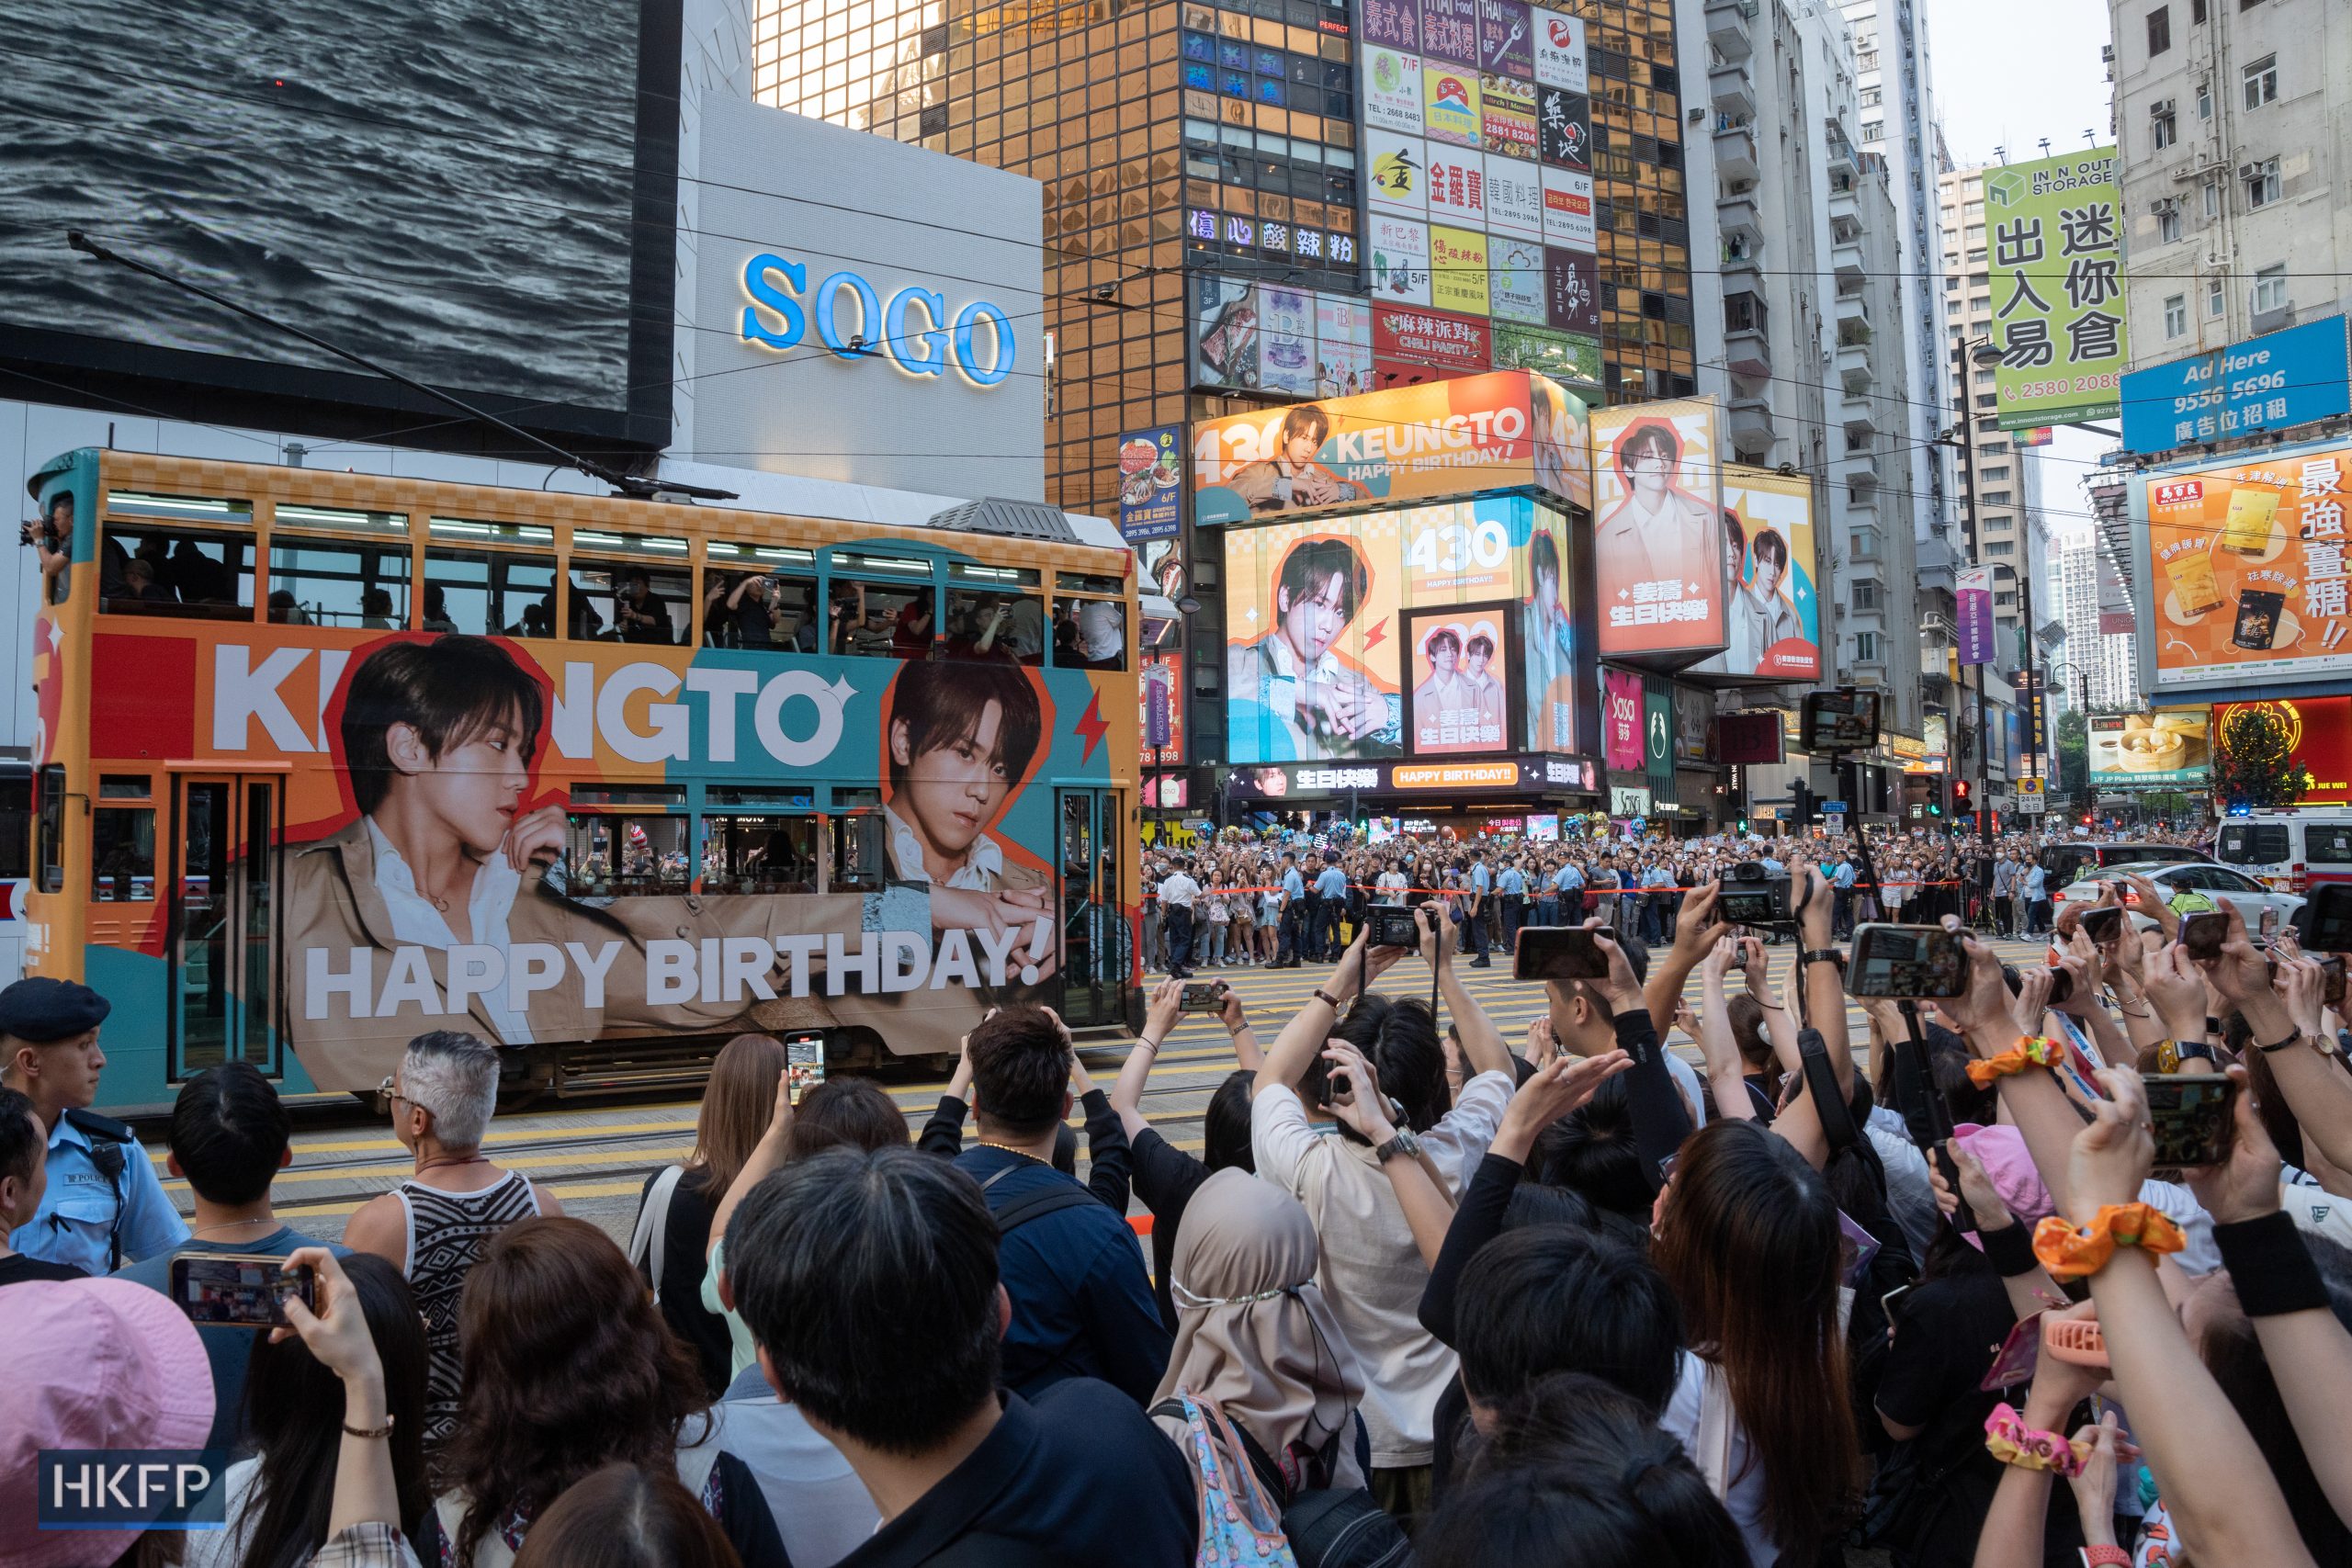 Thousands gather in Hong Kong shopping hub to celebrate Mirror heart throb Keung To’s 23rd birthday. Photo: Kyle Lam/HKFP.